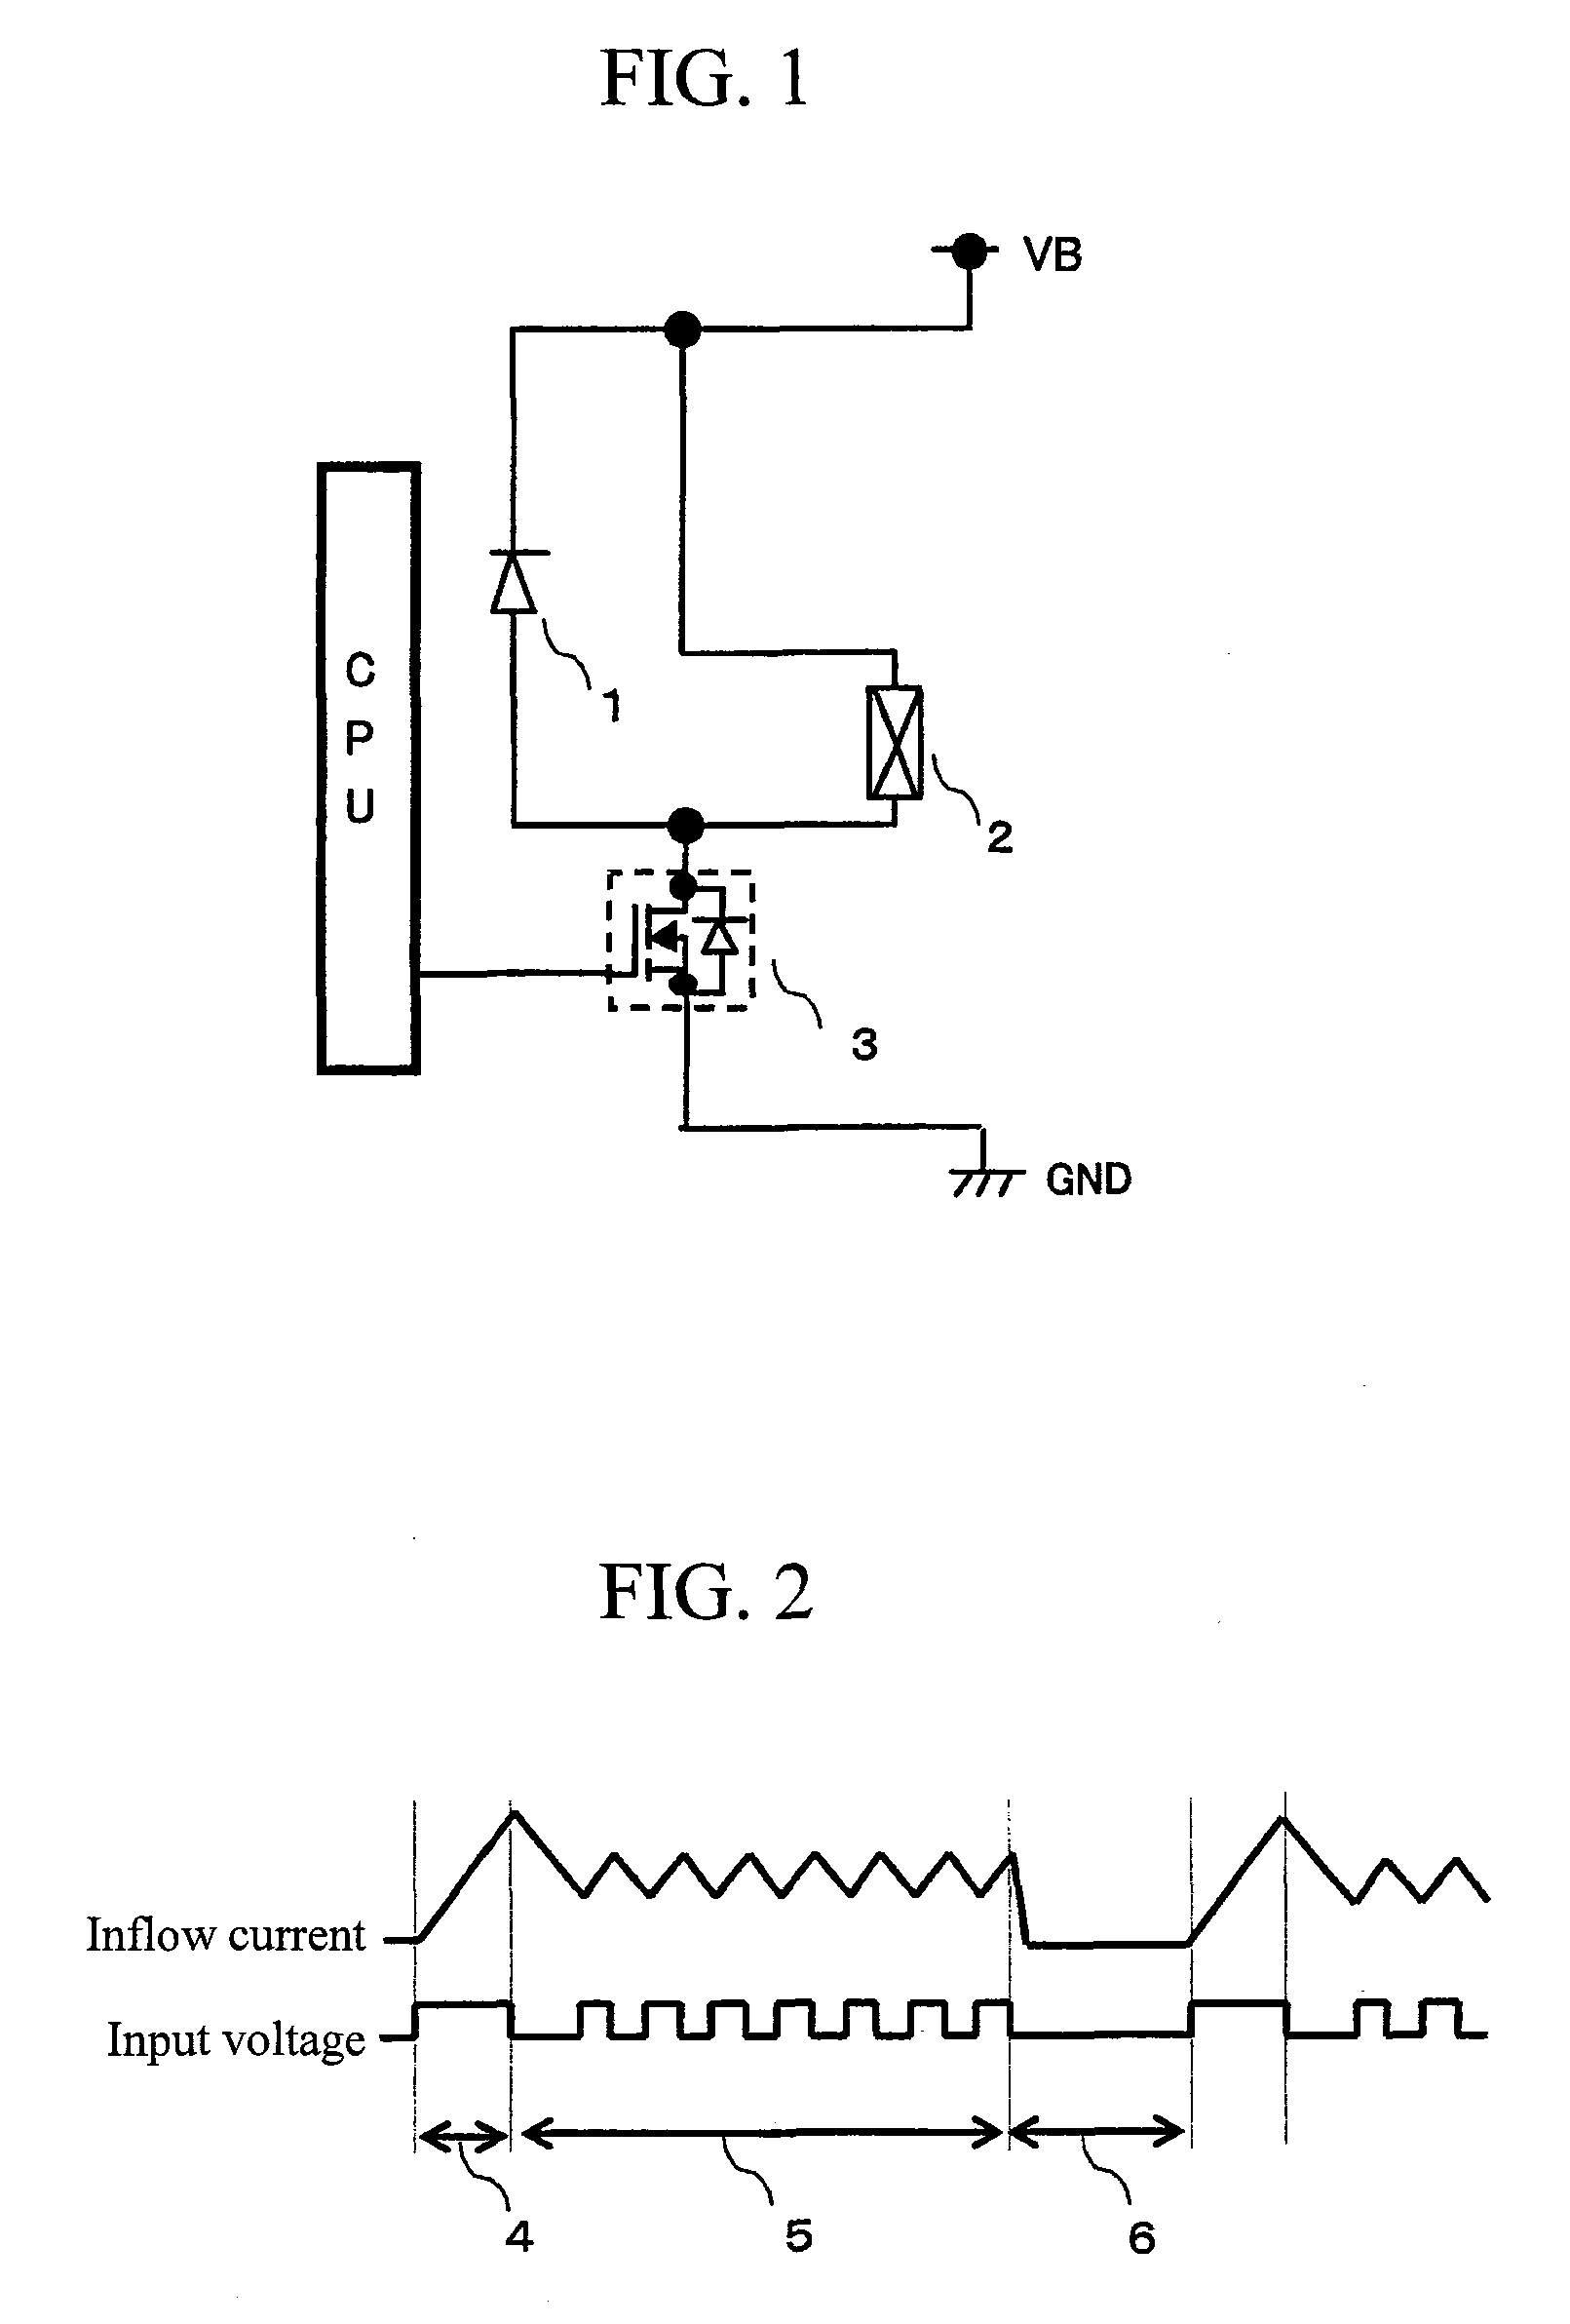 High-pressure fuel pump drive circuit for engine